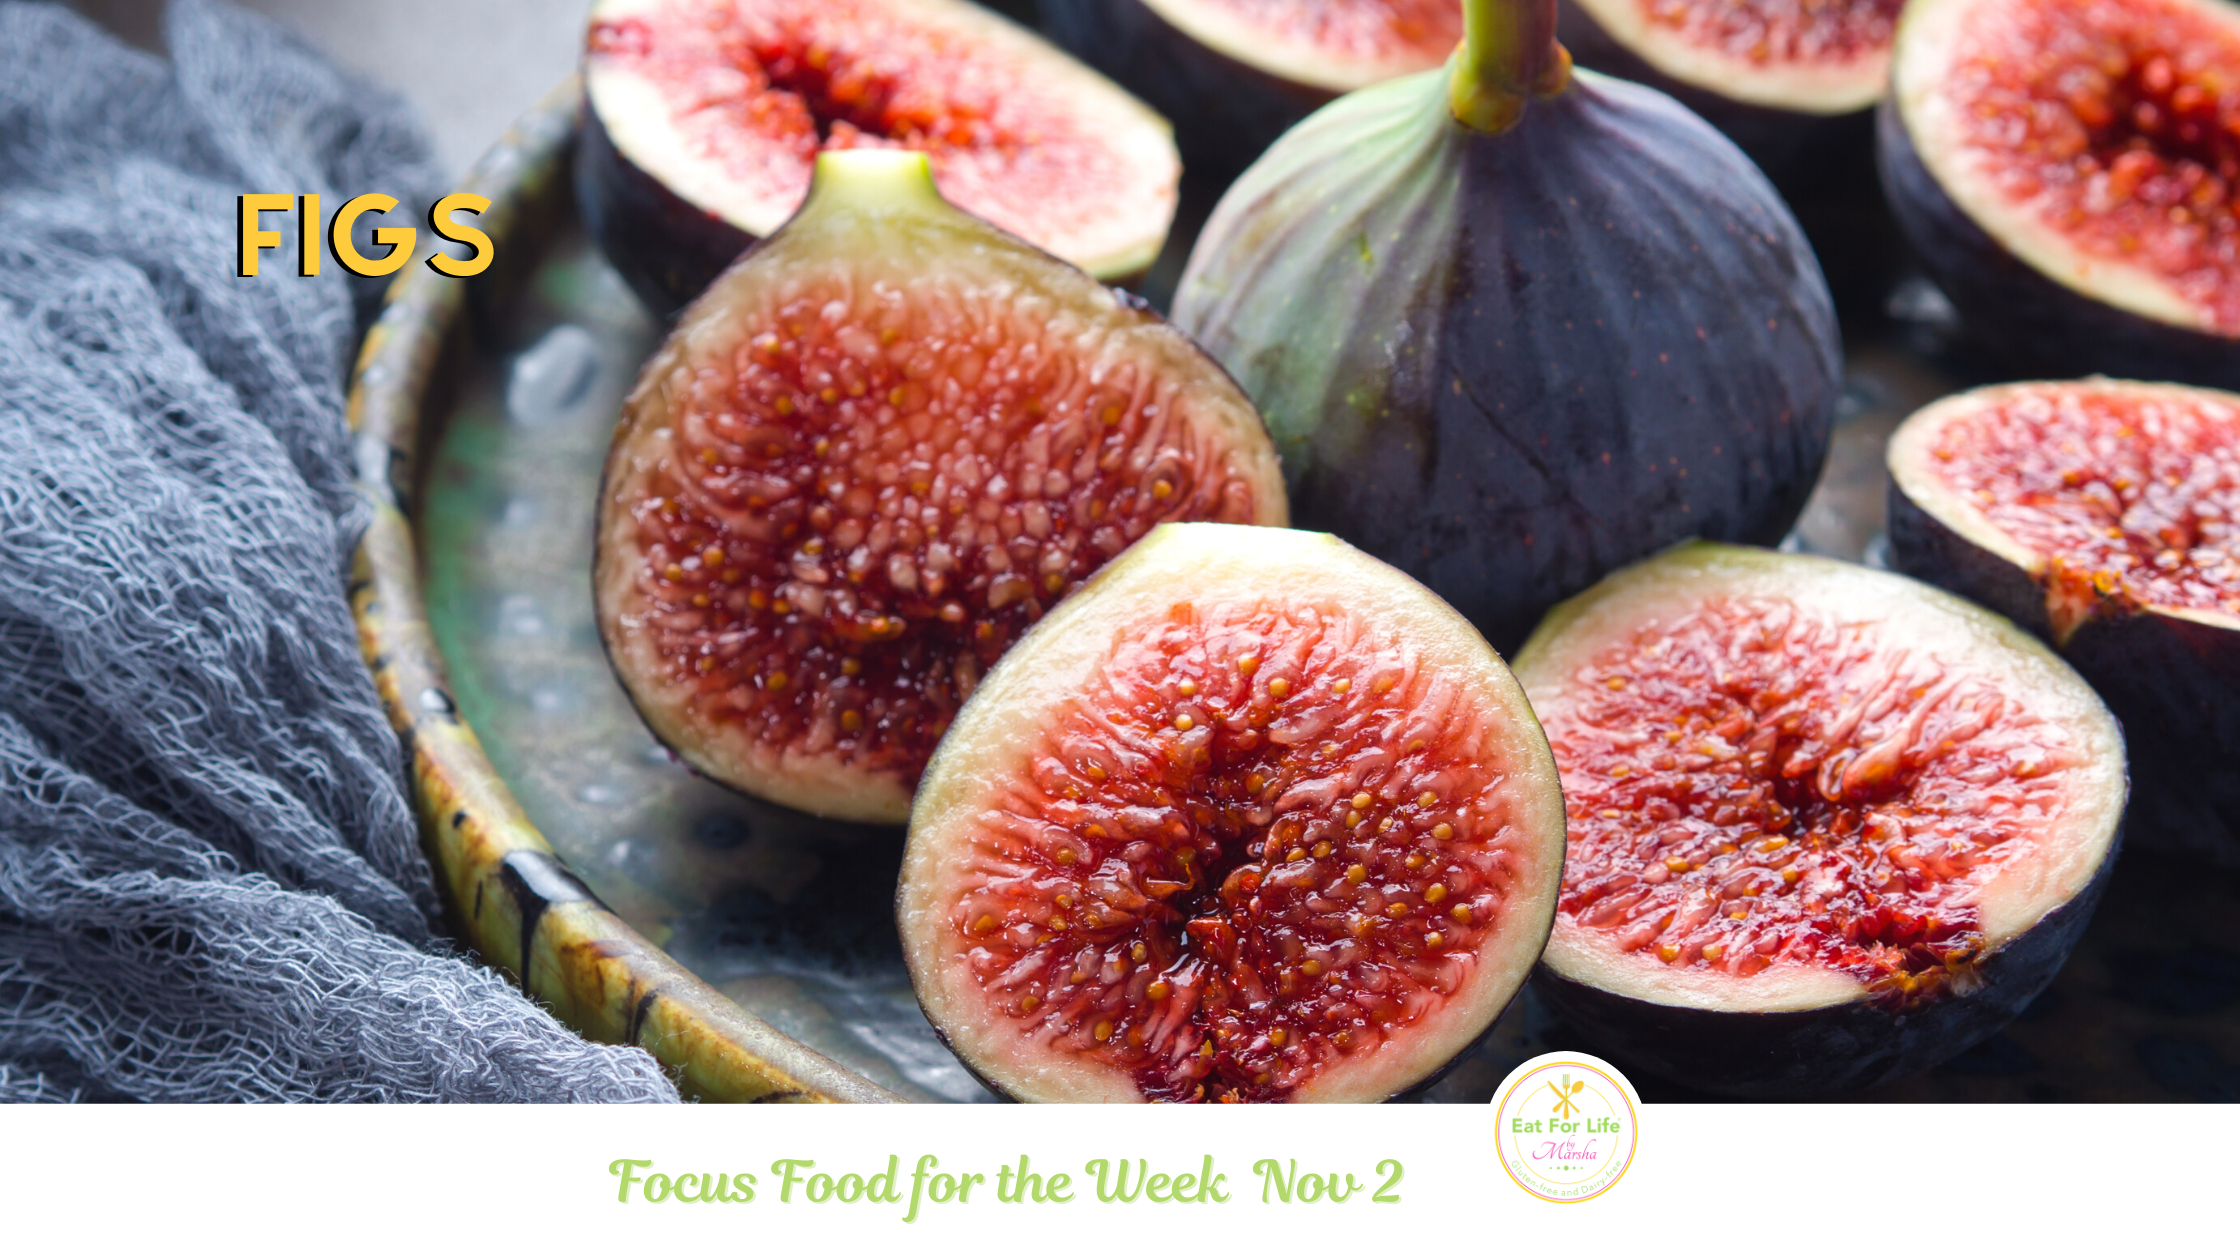 Figs - Focus Food for the week of November 2